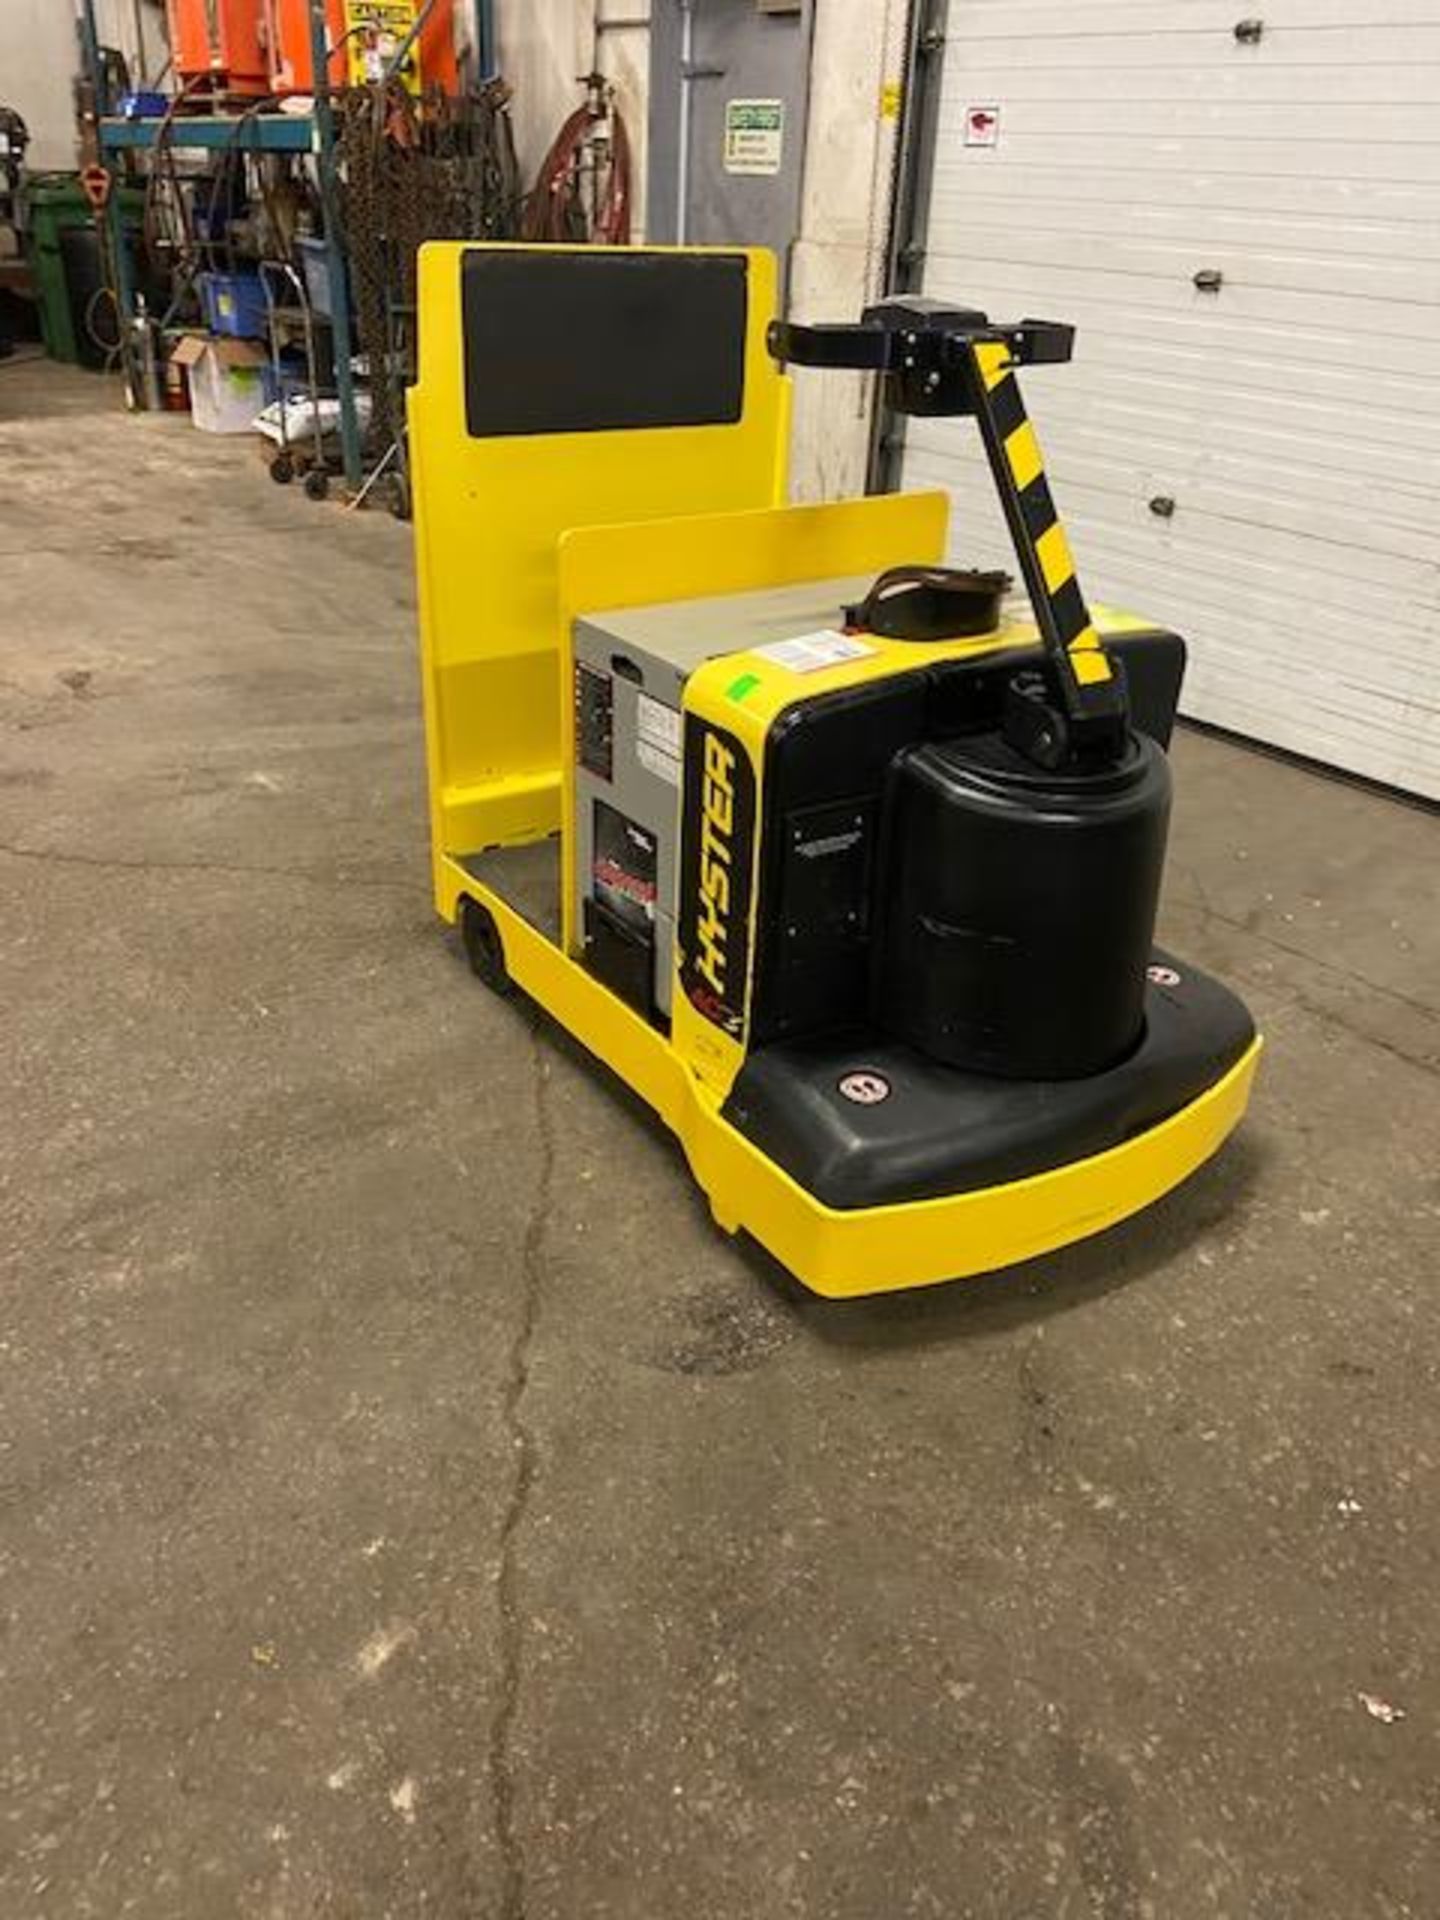 2013 Hyster Ride On Tow Tractor - Tugger / Personal Carrier Electric 24V - Image 2 of 2